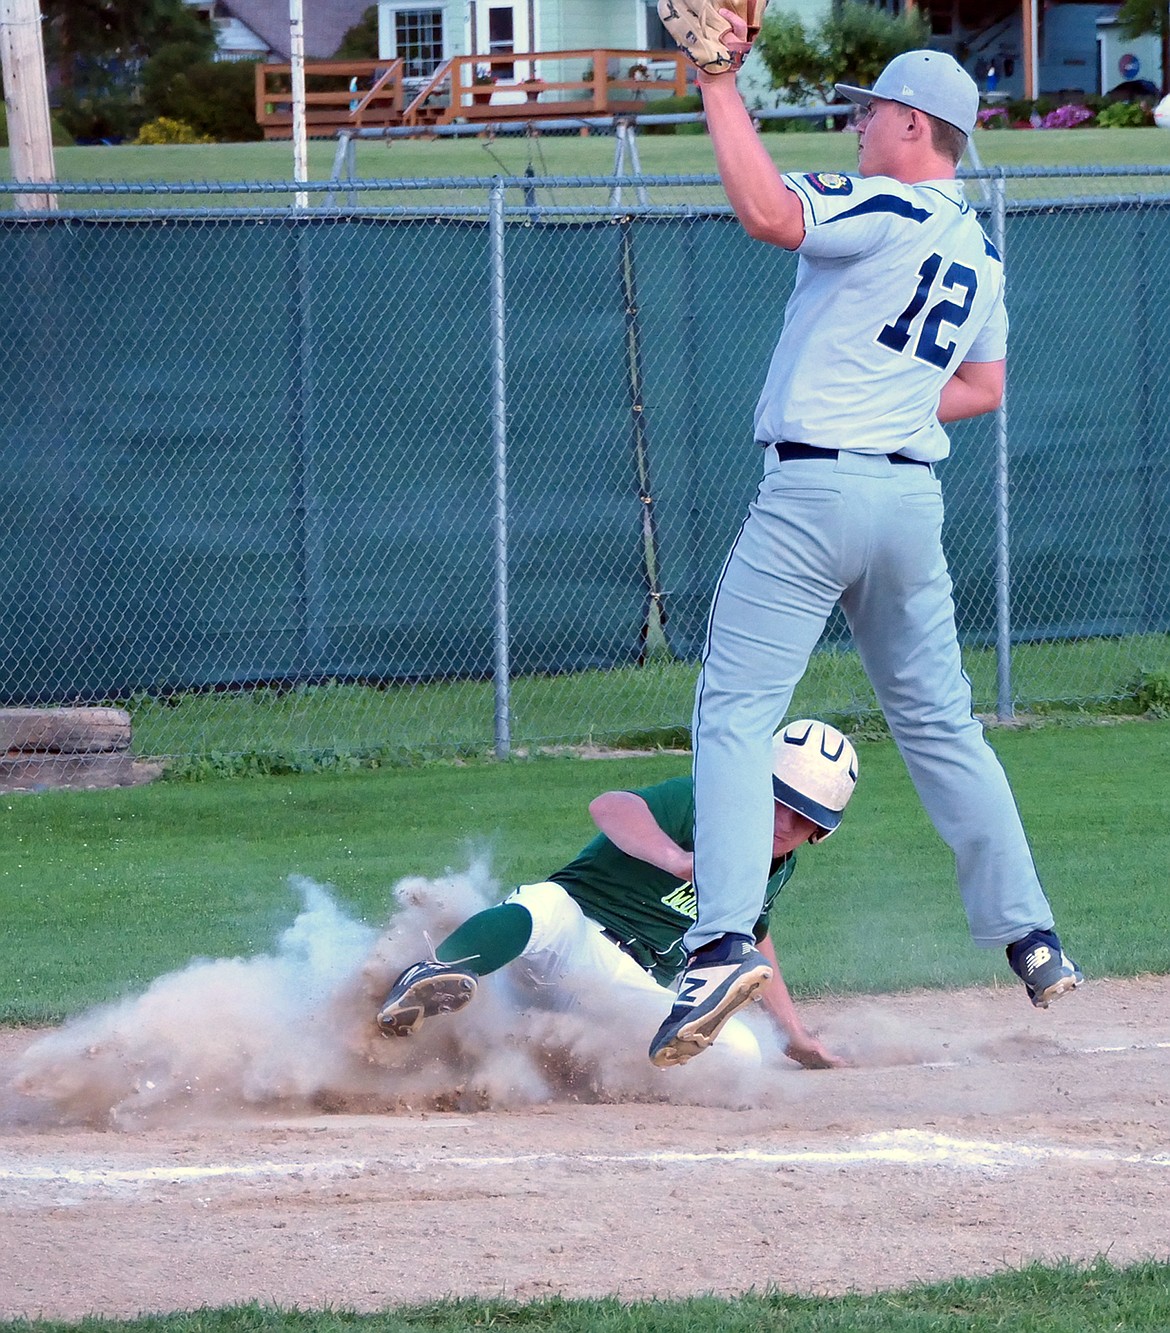 Mission Valley Mariners Eric Dolence slides home for a run in a game verses the Missoula Mavericks on Monday, July 13. (Whitney England/Lake County Leader)